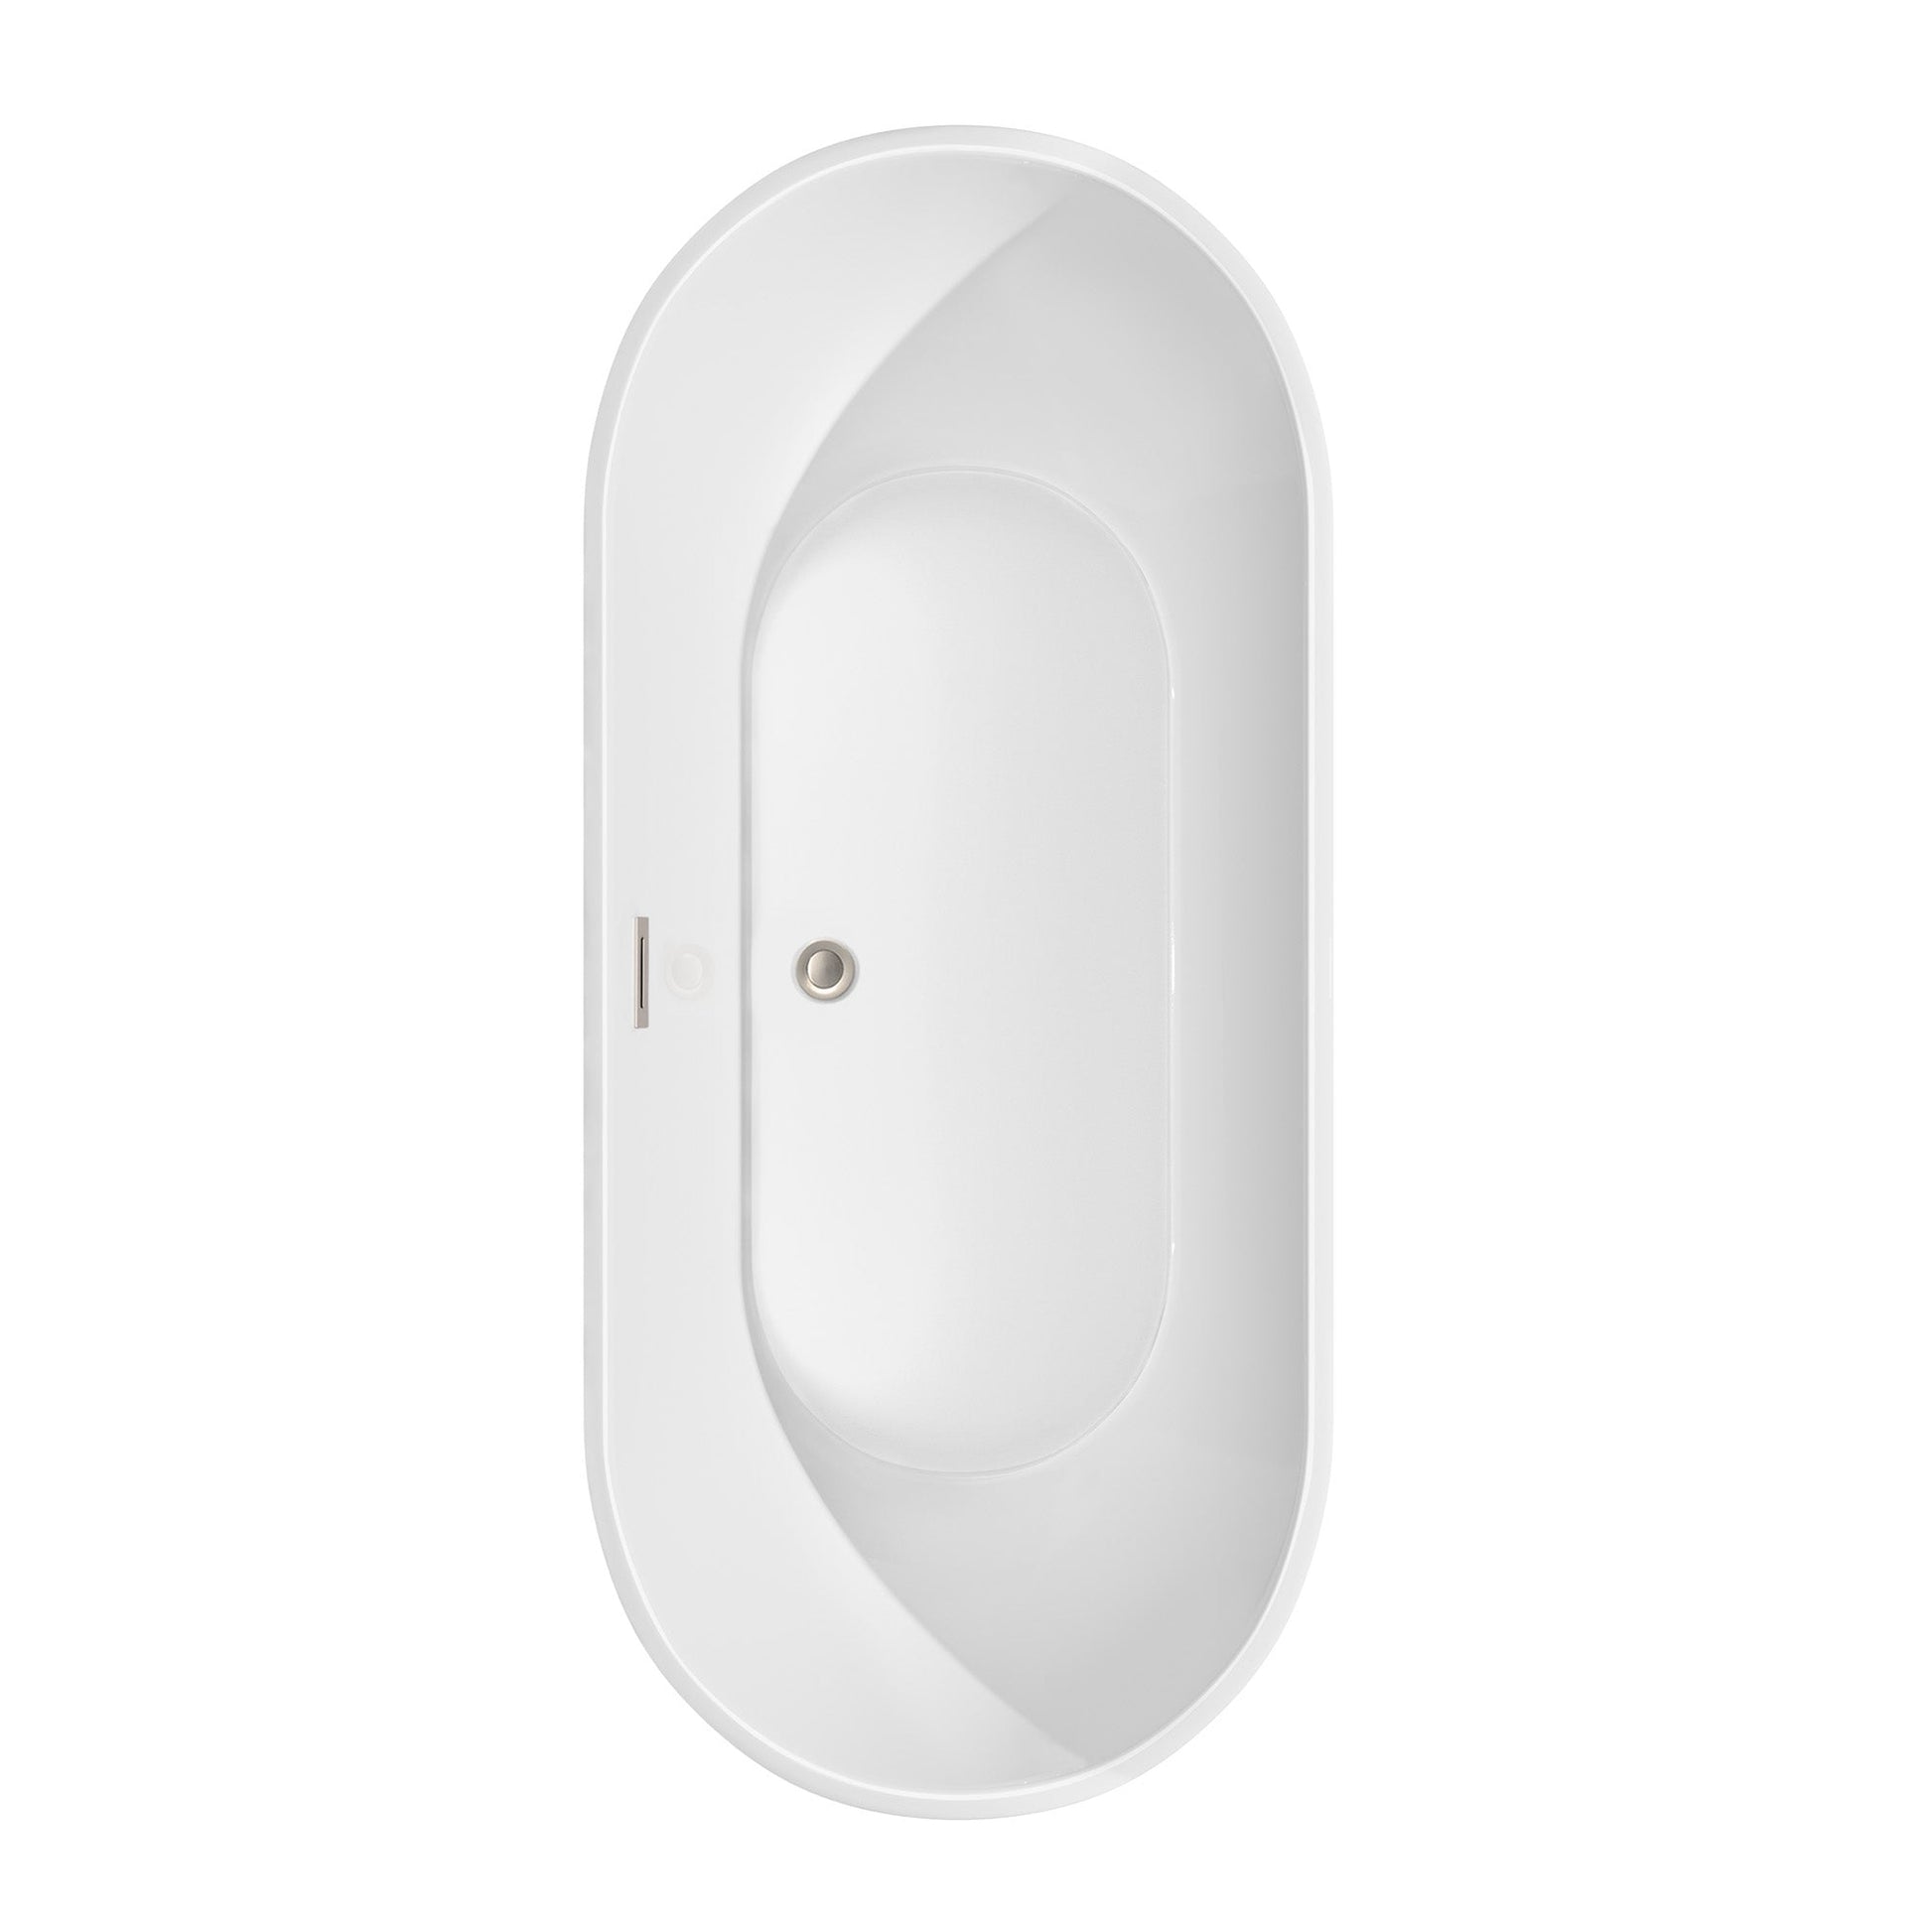 Wyndham Collection Brooklyn 67" Freestanding Bathtub in White With Brushed Nickel Drain and Overflow Trim